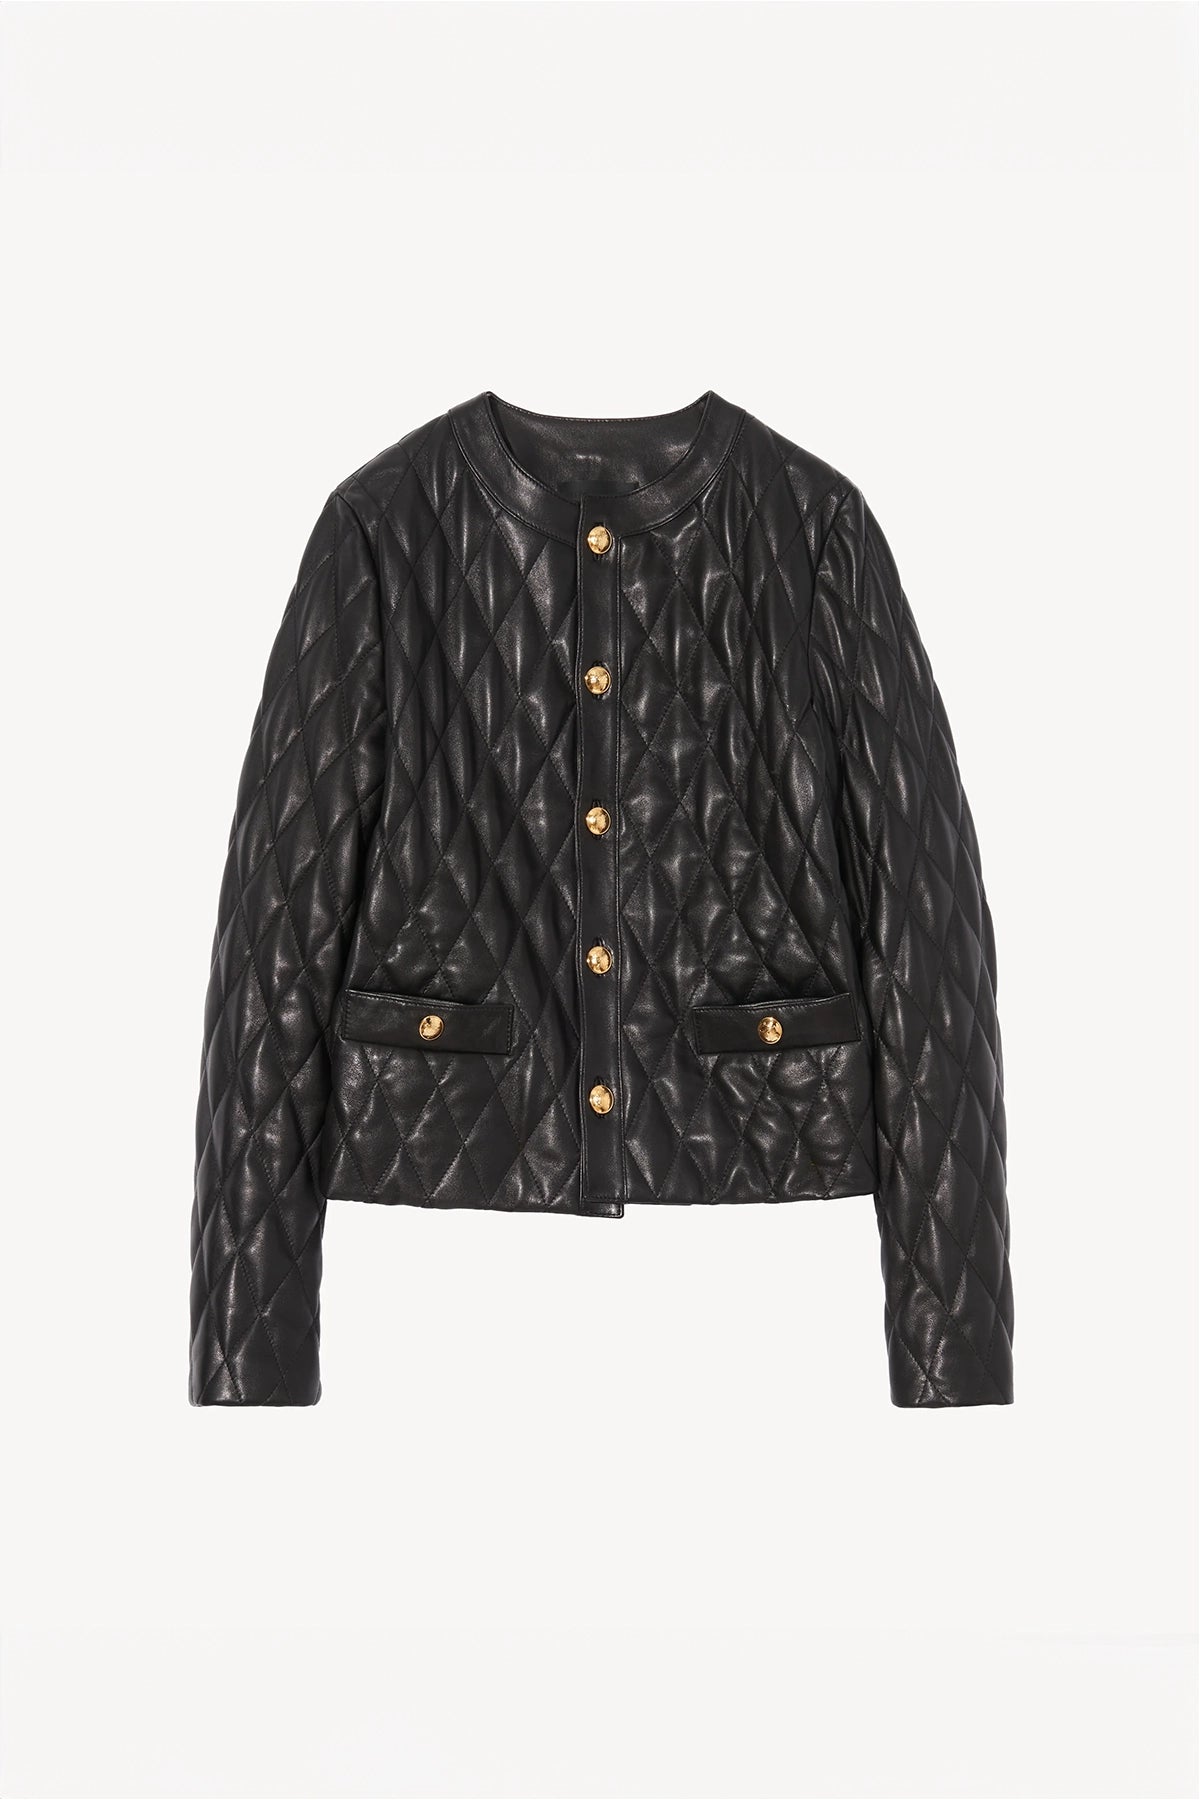 Nili Lotan Amy Quilted Leather Jacket